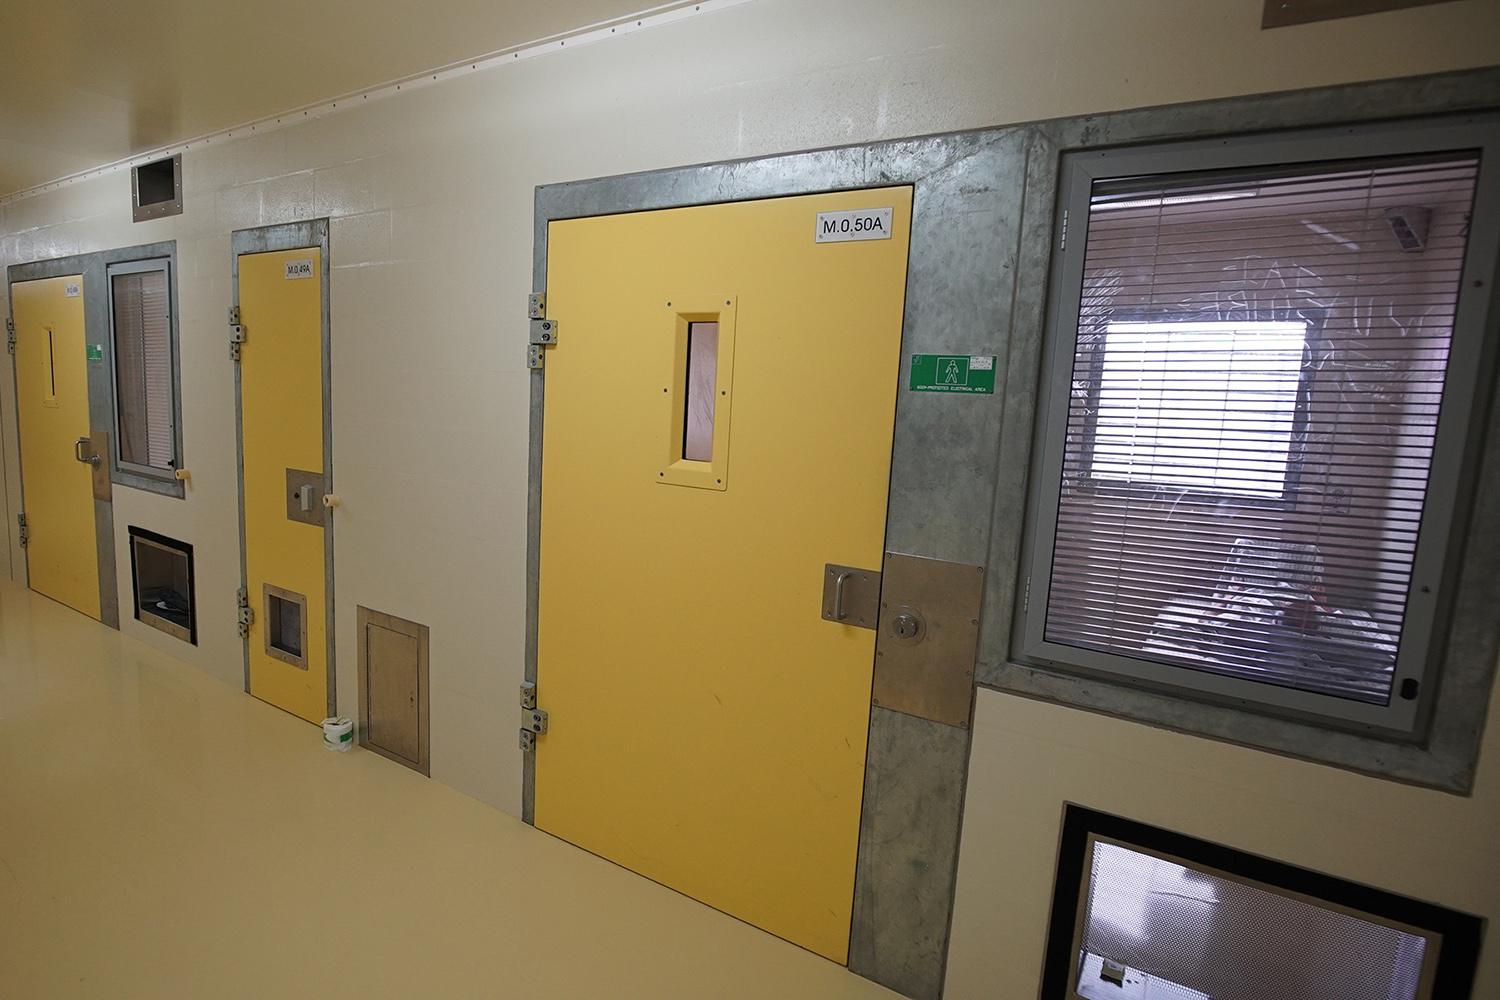 A prisoner lies in his solitary confinement cell in the safety unit at Lotus Glen Correctional Centre, northern Queensland. Prisoners in solitary confinement typically spend 22 hours or more a day locked in small cells, sealed with solid doors, without meaningful social interaction with other prisoners; most contact with prison and health staff is perfunctory and may be wordless.